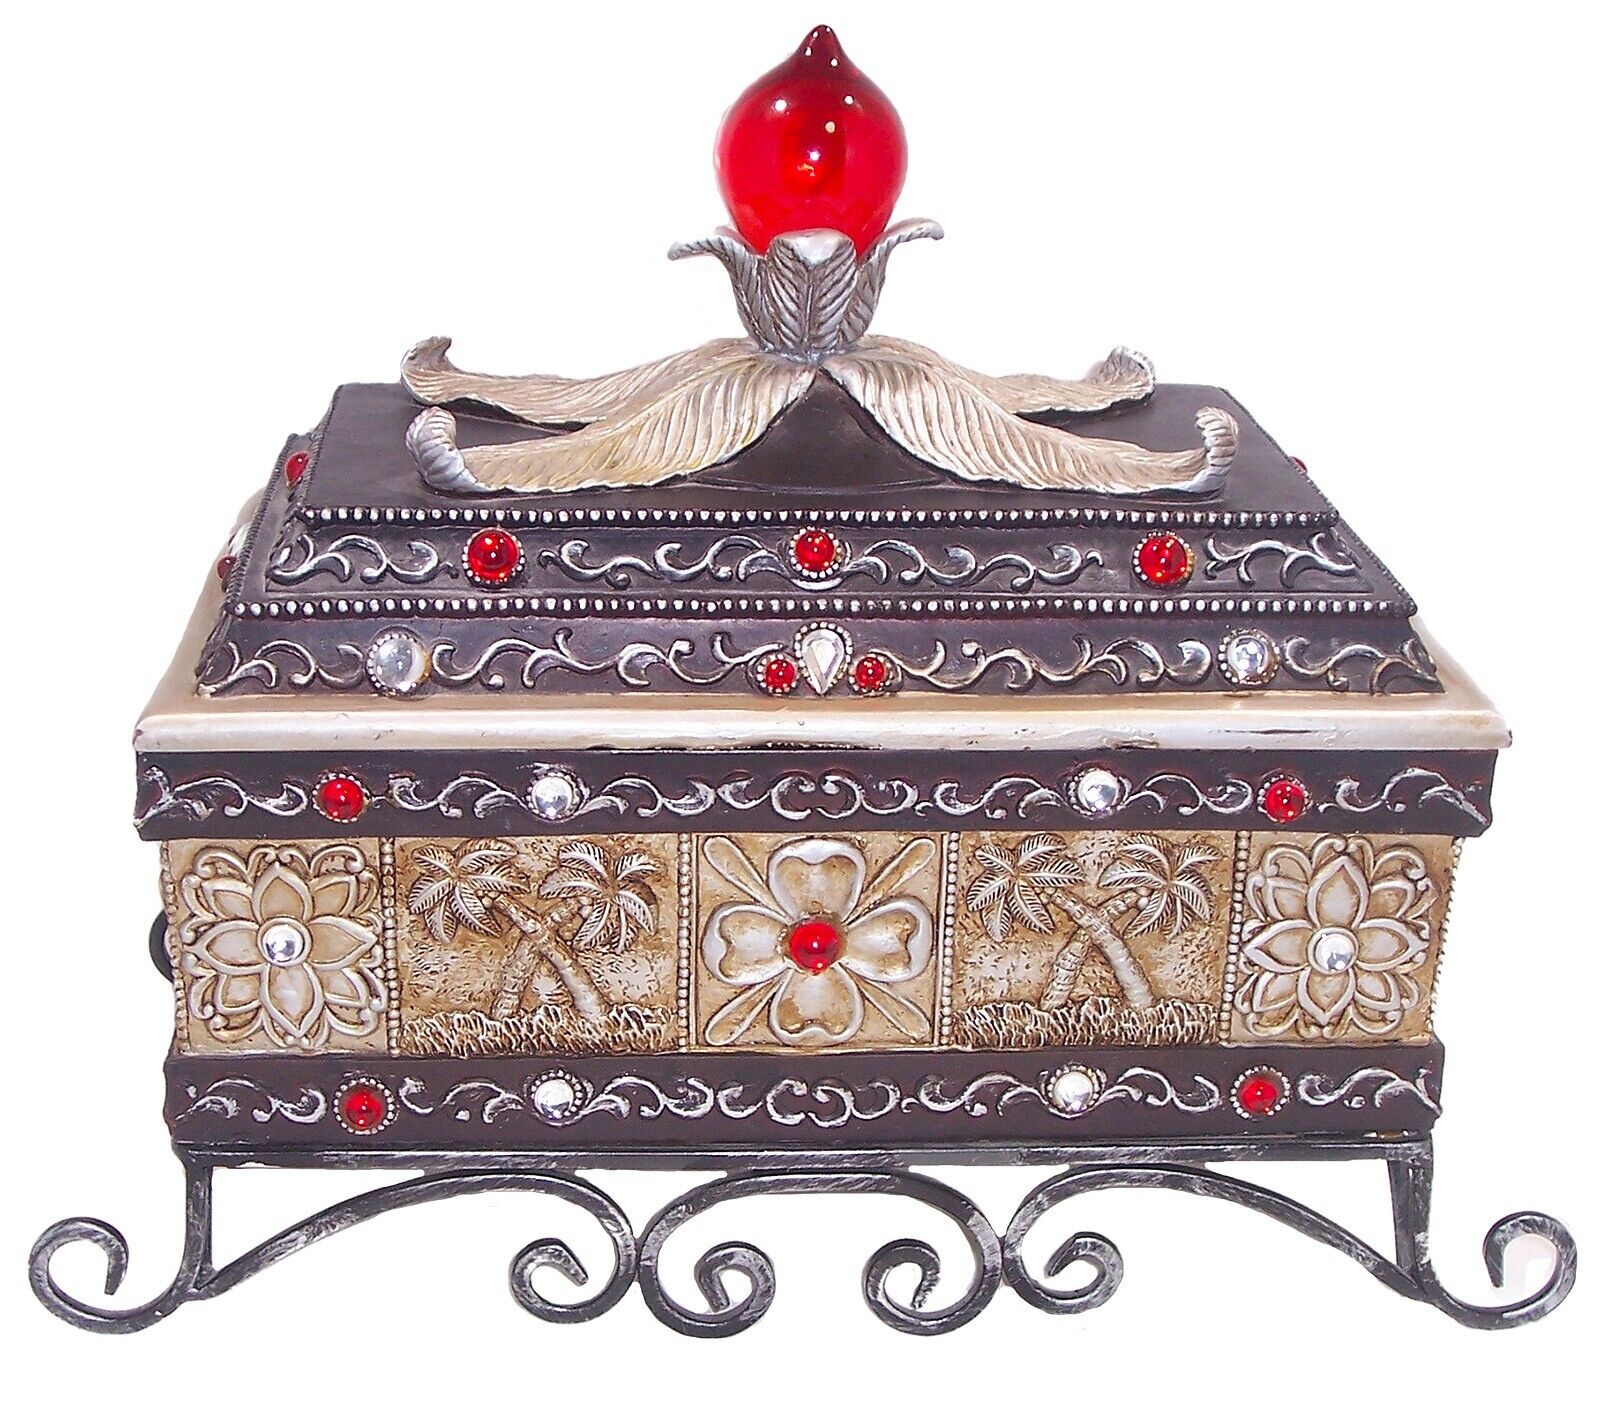 Large Bejeweled Treasure/Jewelry Box, Red Glass Handle, Wrought Iron Base